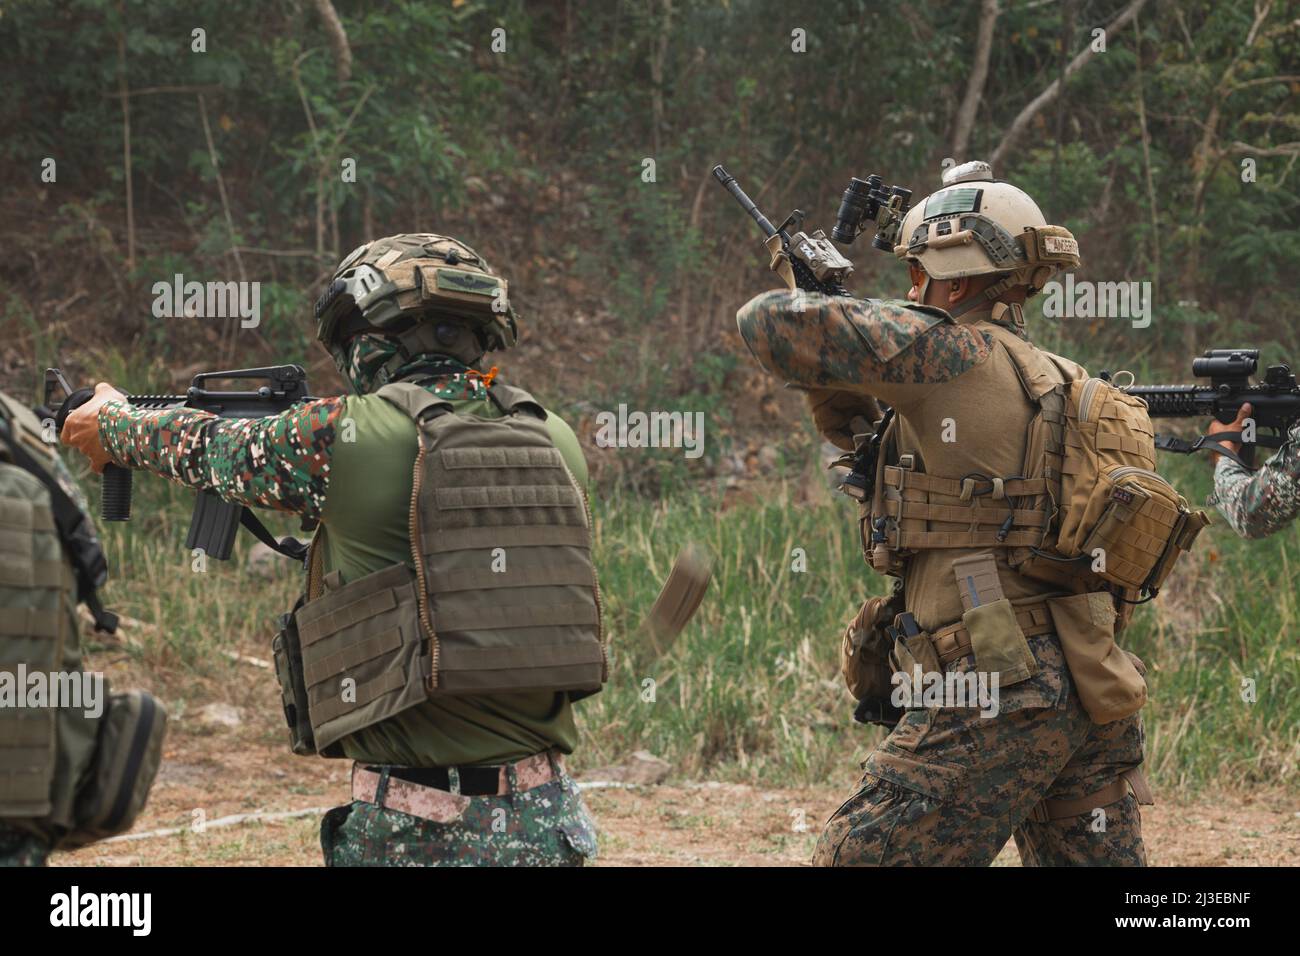 U.S. Marines with 3d Reconnaissance Battalion, 3d Marine Division, and Philippine Marines with Force Reconnaissance Group, conduct a close quarters battle range during Balikatan 22 at Marine Barracks Gregorio Lim, Cavite, Philippines, April 2, 2022. Balikatan is an annual exercise between the Armed Forces of the Philippines and U.S. military designed to strengthen bilateral interoperability, capabilities, trust, and cooperation built over decades of shared experiences. Balikatan, Tagalog for ‘shoulder-to-shoulder,’ is a long-standing bilateral exercise between the Philippines and the United St Stock Photo